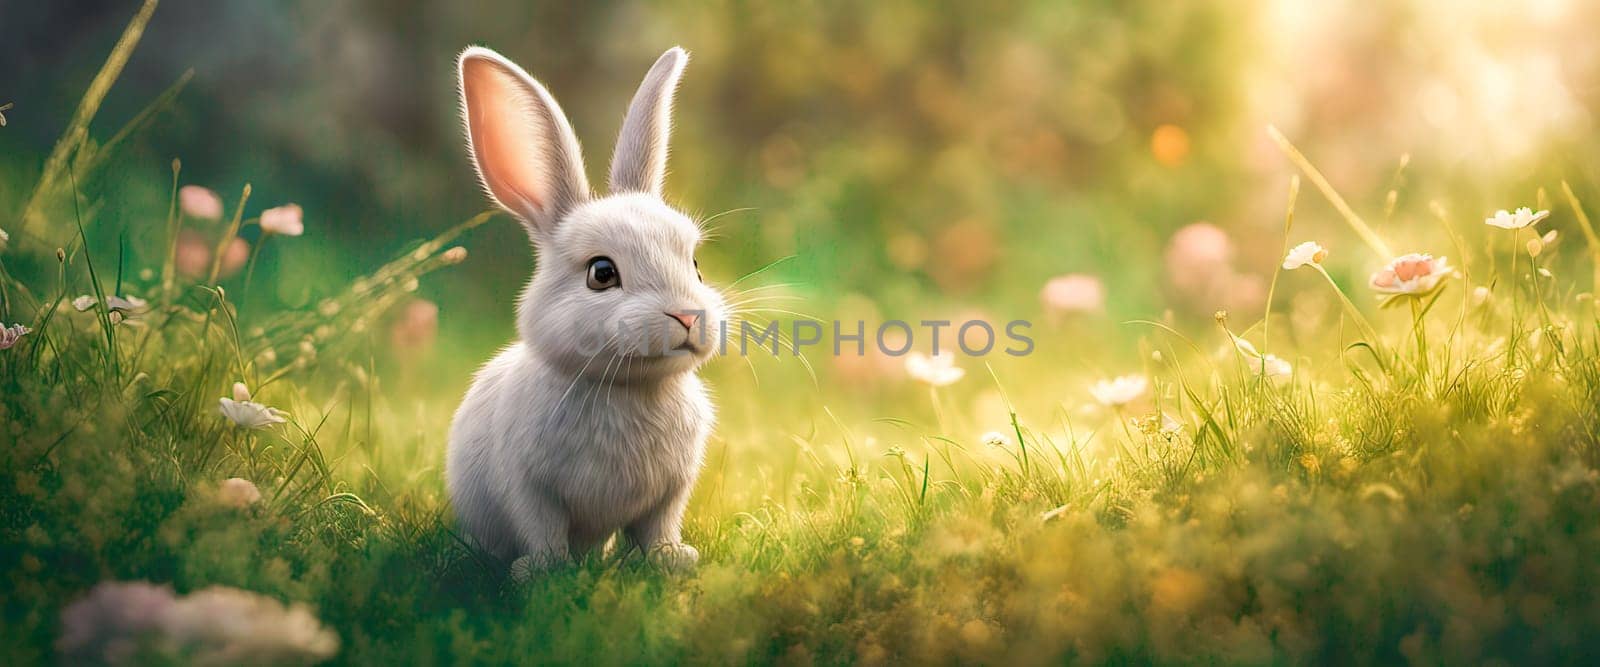 Happy Easter Bunny on a card on their with flowers at sunset. Cute hare